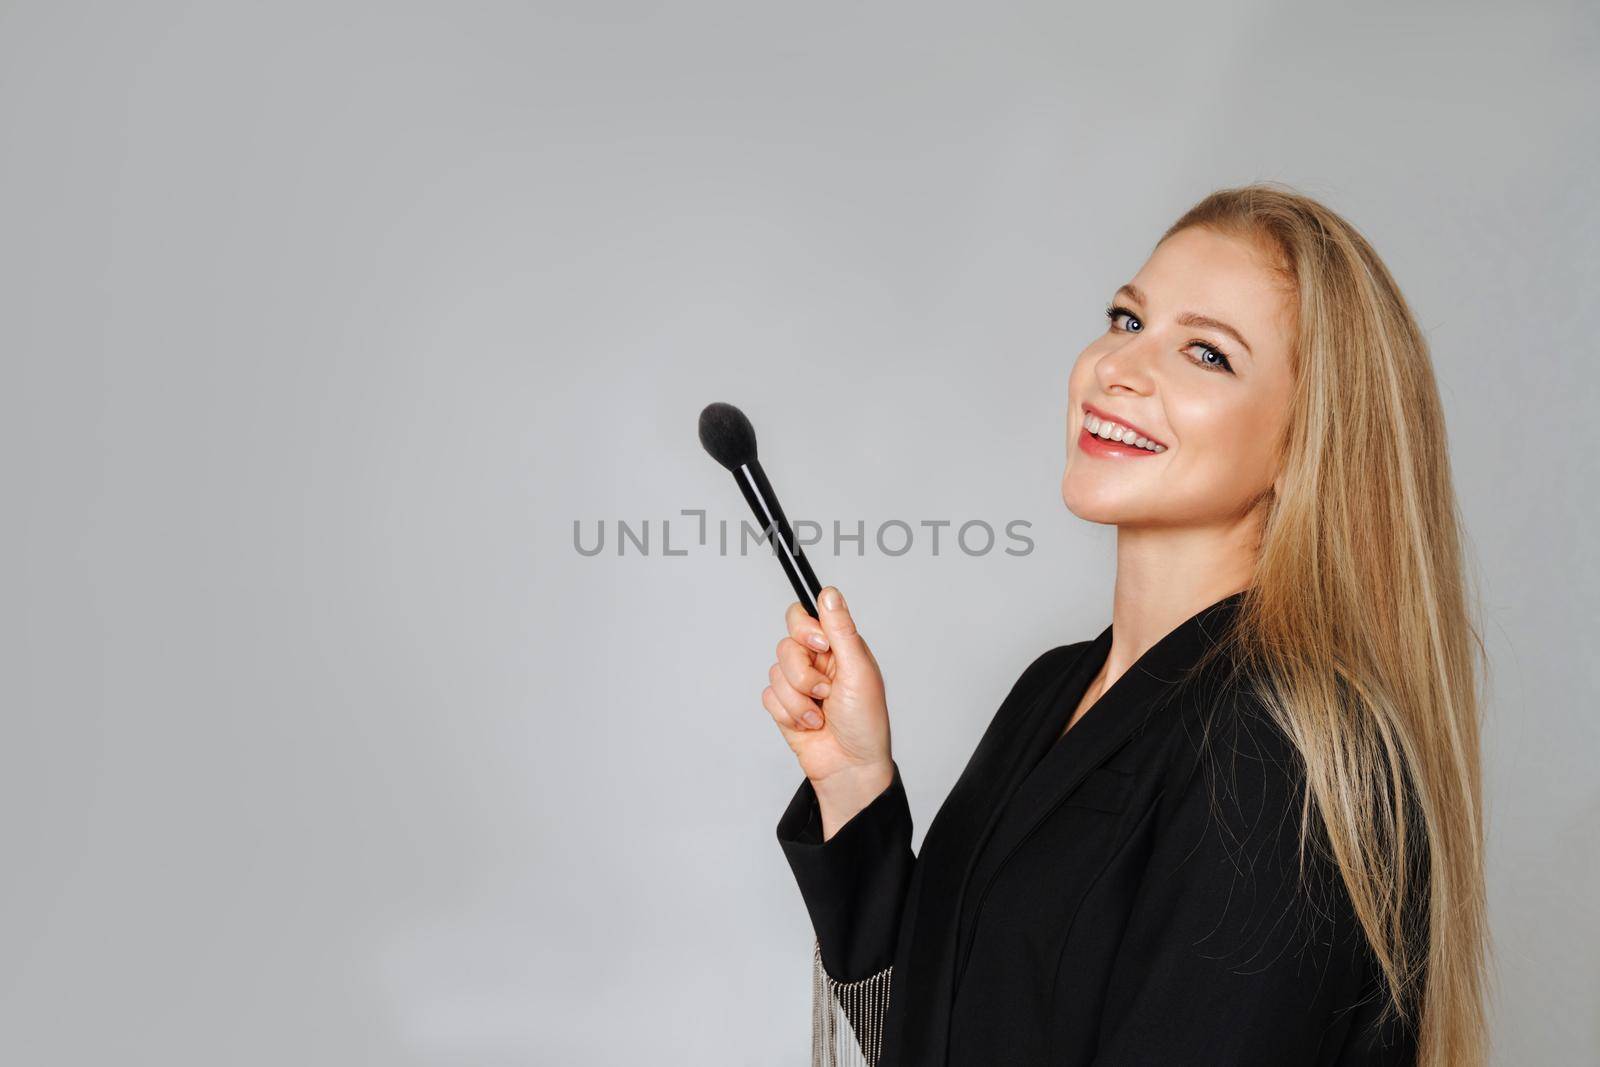 Beautiful middle aged woman makeup waving one makeup brush, winking at the camera and smiling. Blond hair and a black jacket on a light background